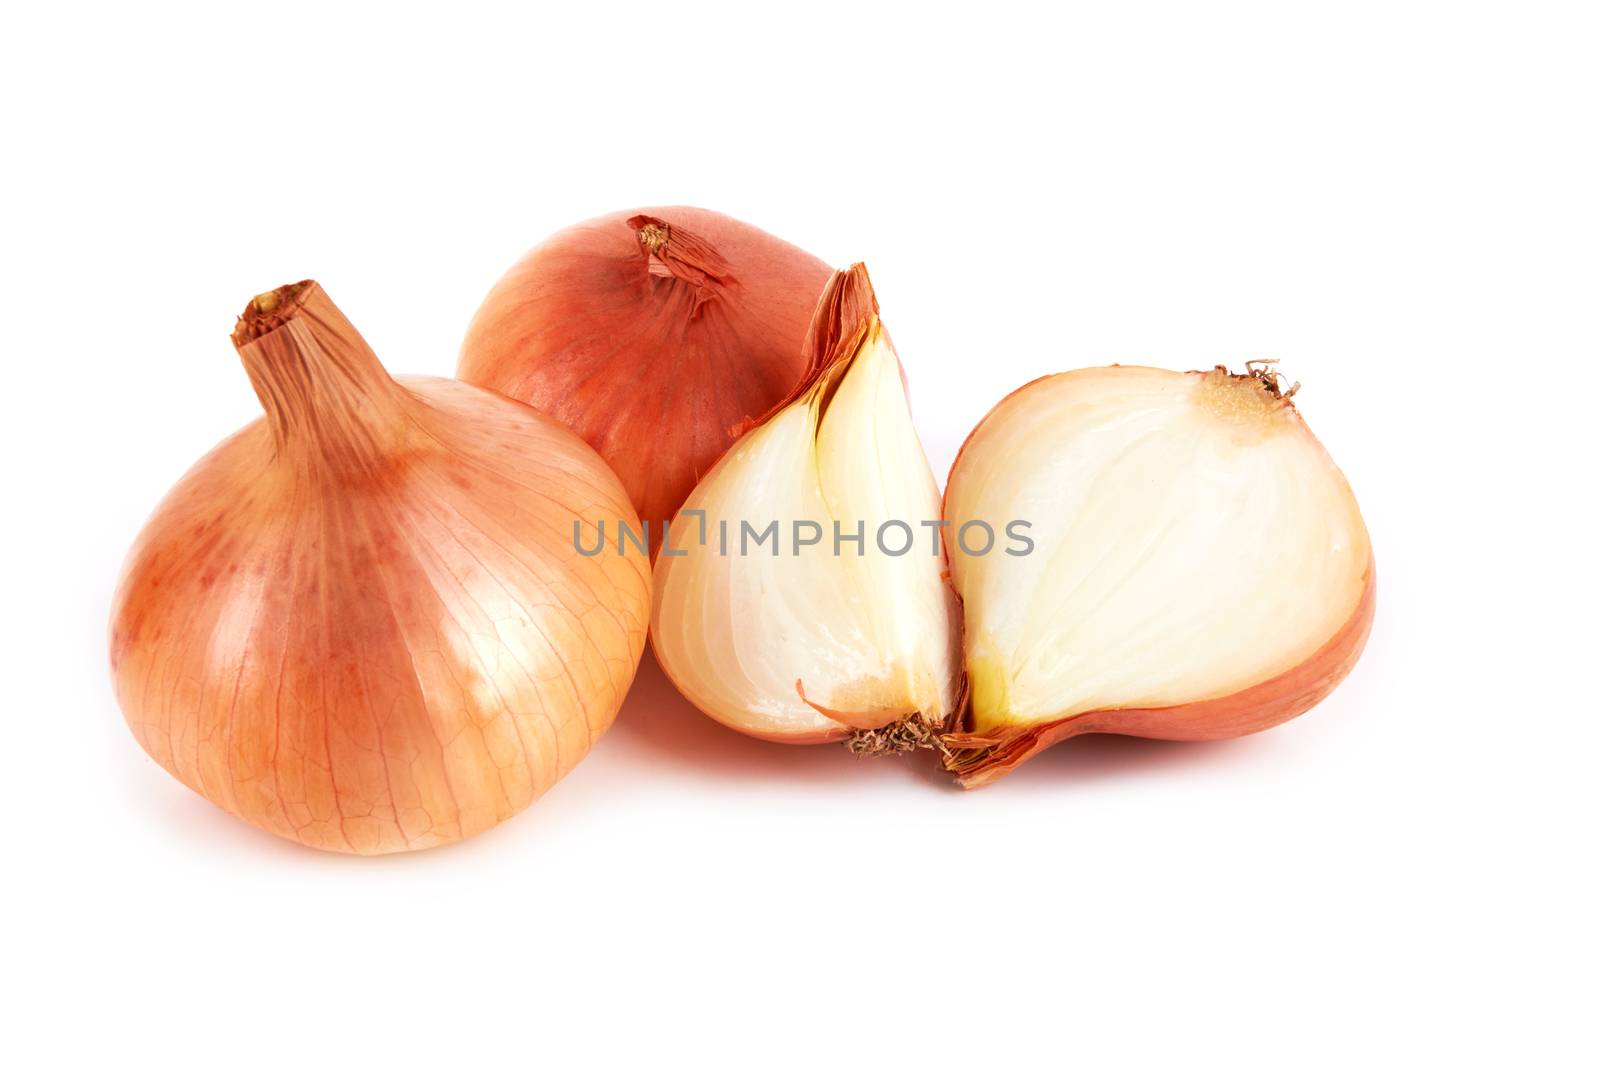 Gold onion bulbs isolated on white background